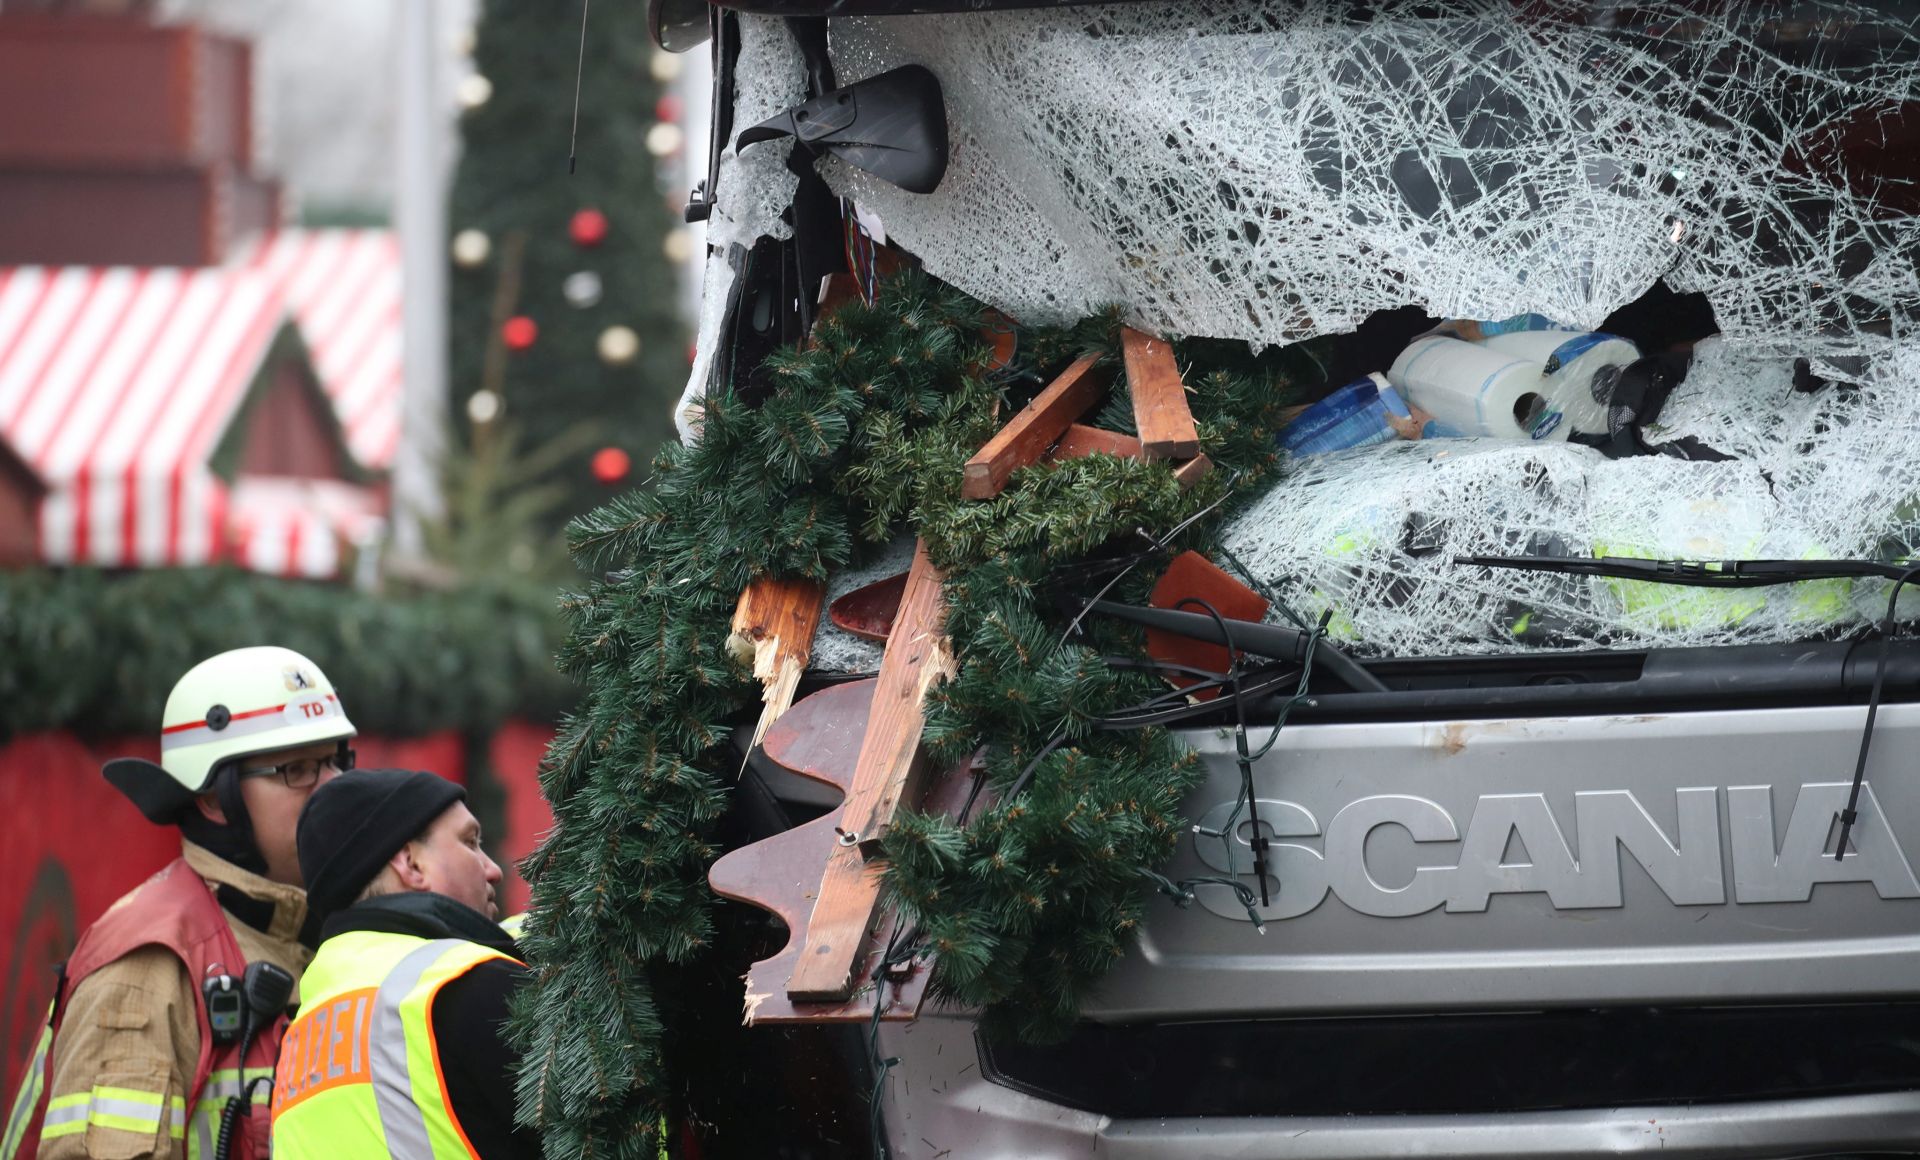 epa05683080 A police officer and fireman inspect a damaged truck on a road beside the Christmas market at Breitscheidplatz in Berlin, Germany, 20 December 2016. According to the police, at least 12 people were killed and at least 48 injured after a truck ploughed into a busy Christmas market in Berlin. Authorities are investigating the incident as a 'possible terrorist attack,' media reported.  EPA/MICHAEL KAPPELER